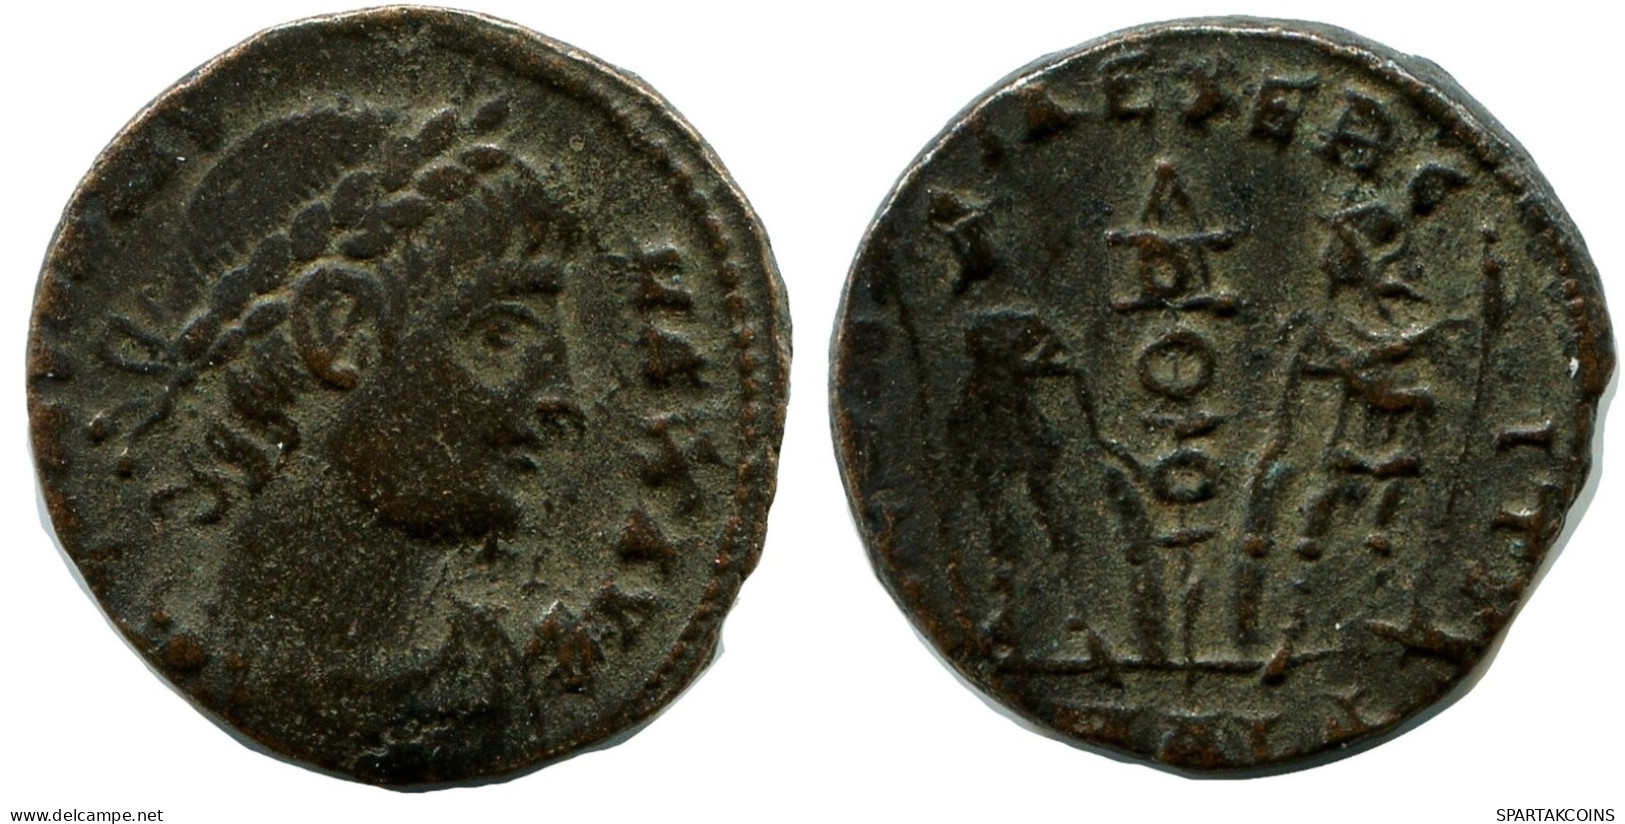 CONSTANS MINTED IN ALEKSANDRIA FOUND IN IHNASYAH HOARD EGYPT #ANC11425.14.U.A - The Christian Empire (307 AD To 363 AD)